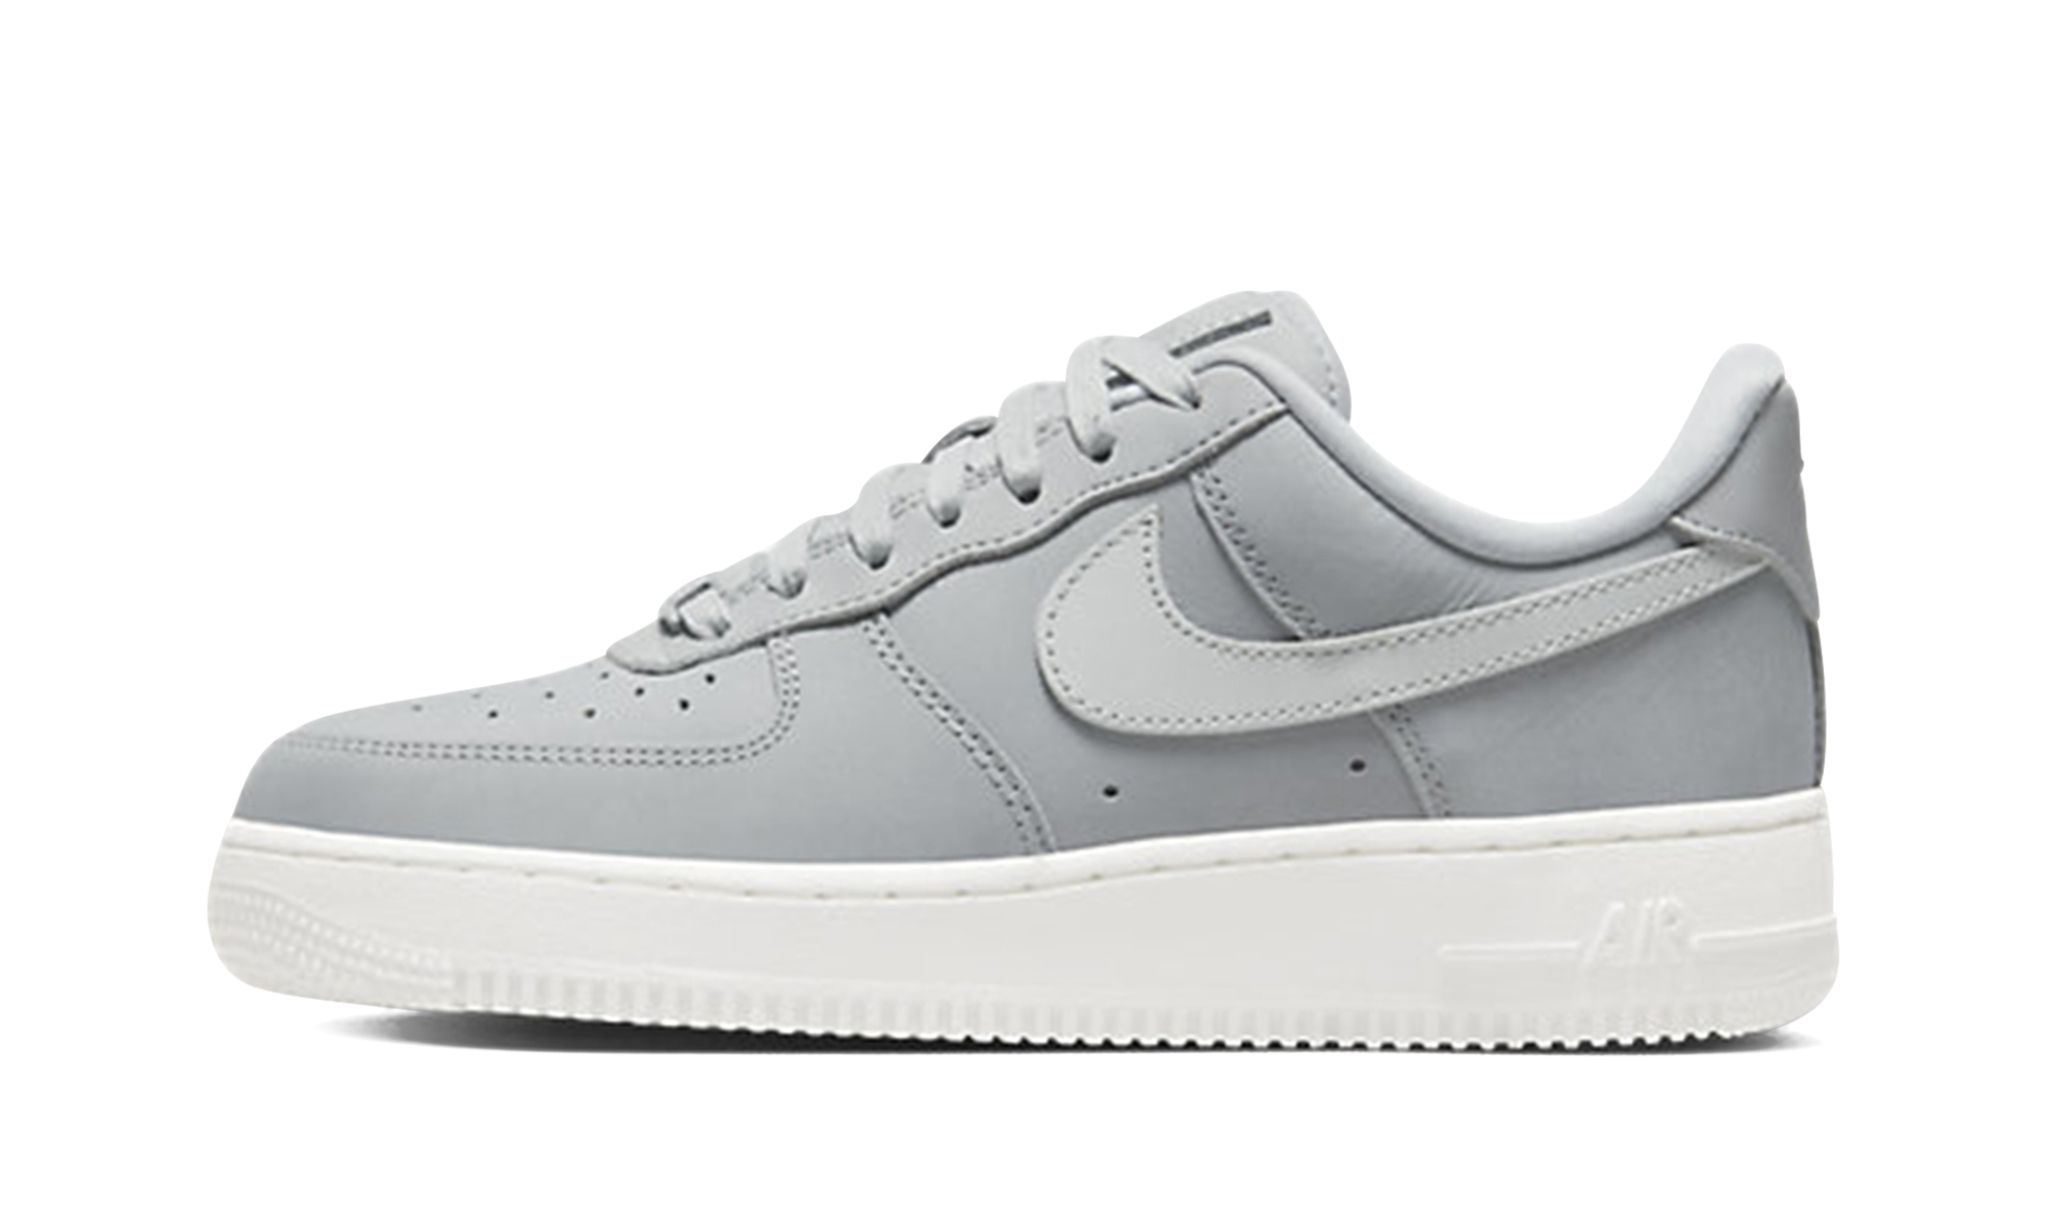 Nike Air Force 1 Low '07 PRM WMNS "Wolf Grey" - 1